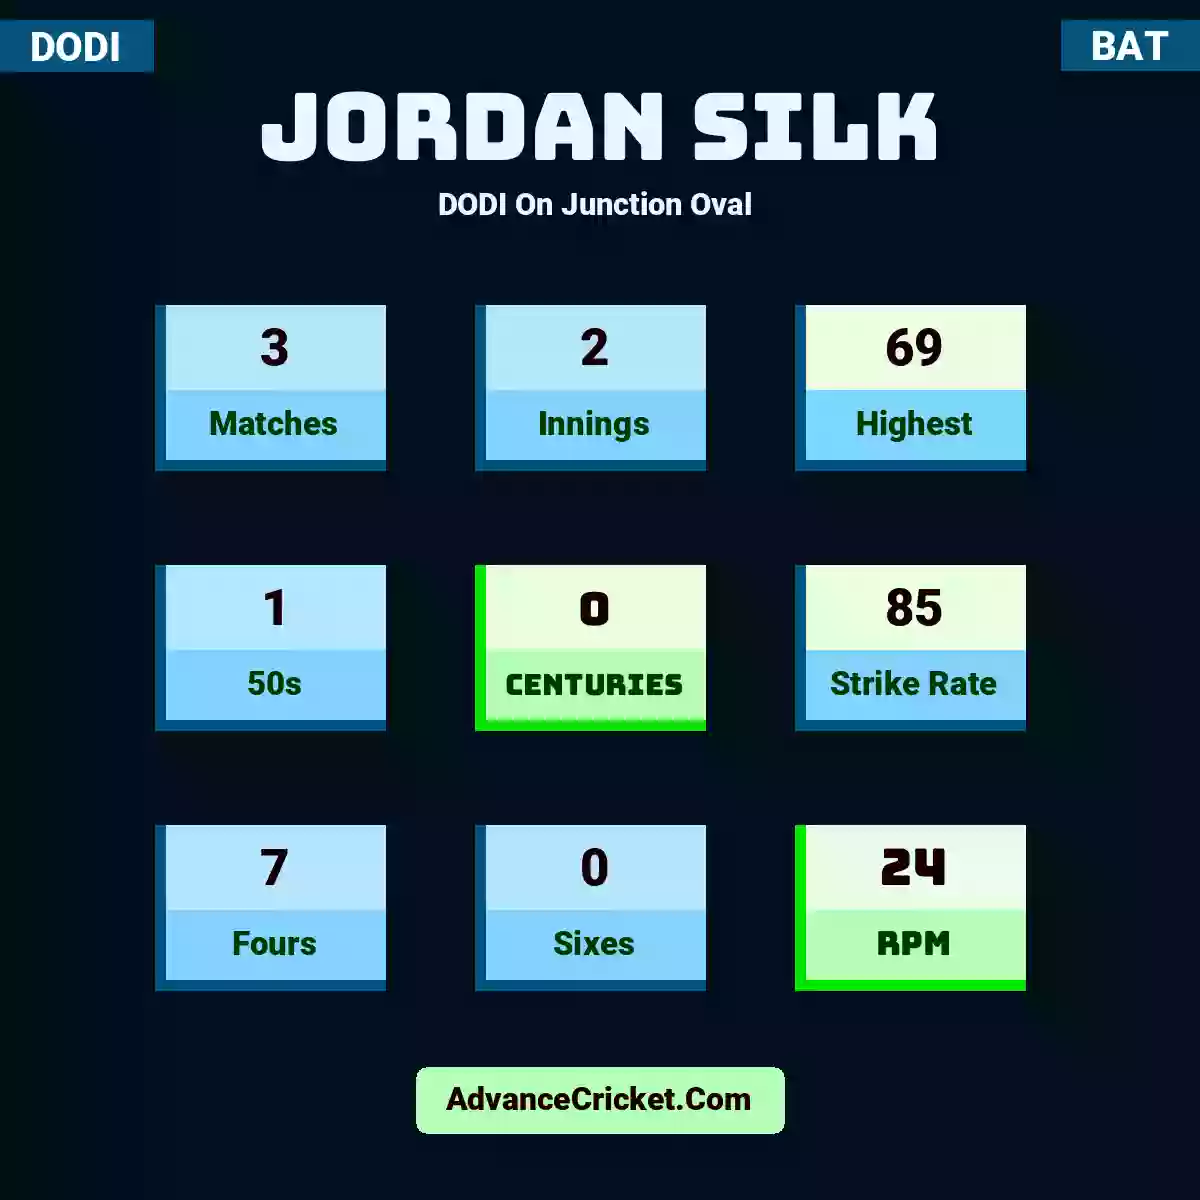 Jordan Silk DODI  On Junction Oval , Jordan Silk played 3 matches, scored 69 runs as highest, 1 half-centuries, and 0 centuries, with a strike rate of 85. J.Silk hit 7 fours and 0 sixes, with an RPM of 24.